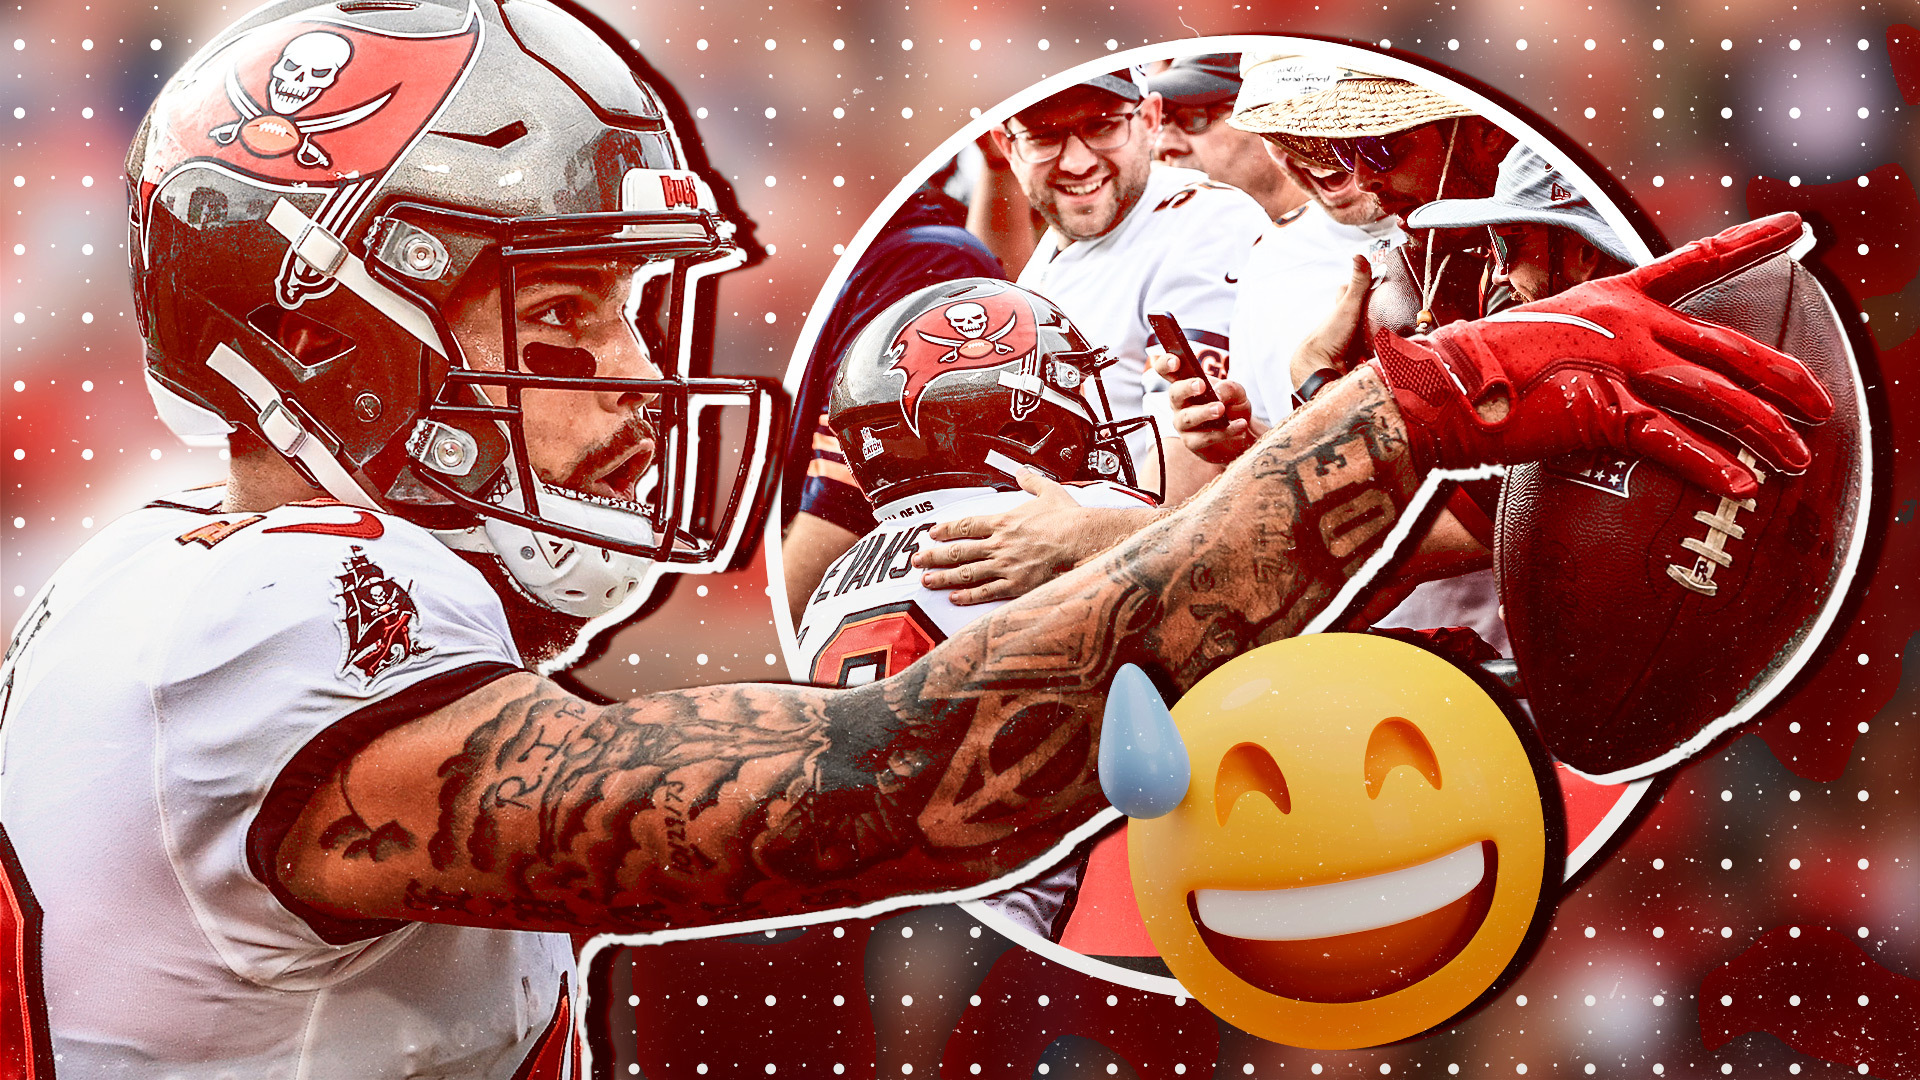 Tom Brady's historic 600th career TD pass temporarily given to fan by Mike Evans